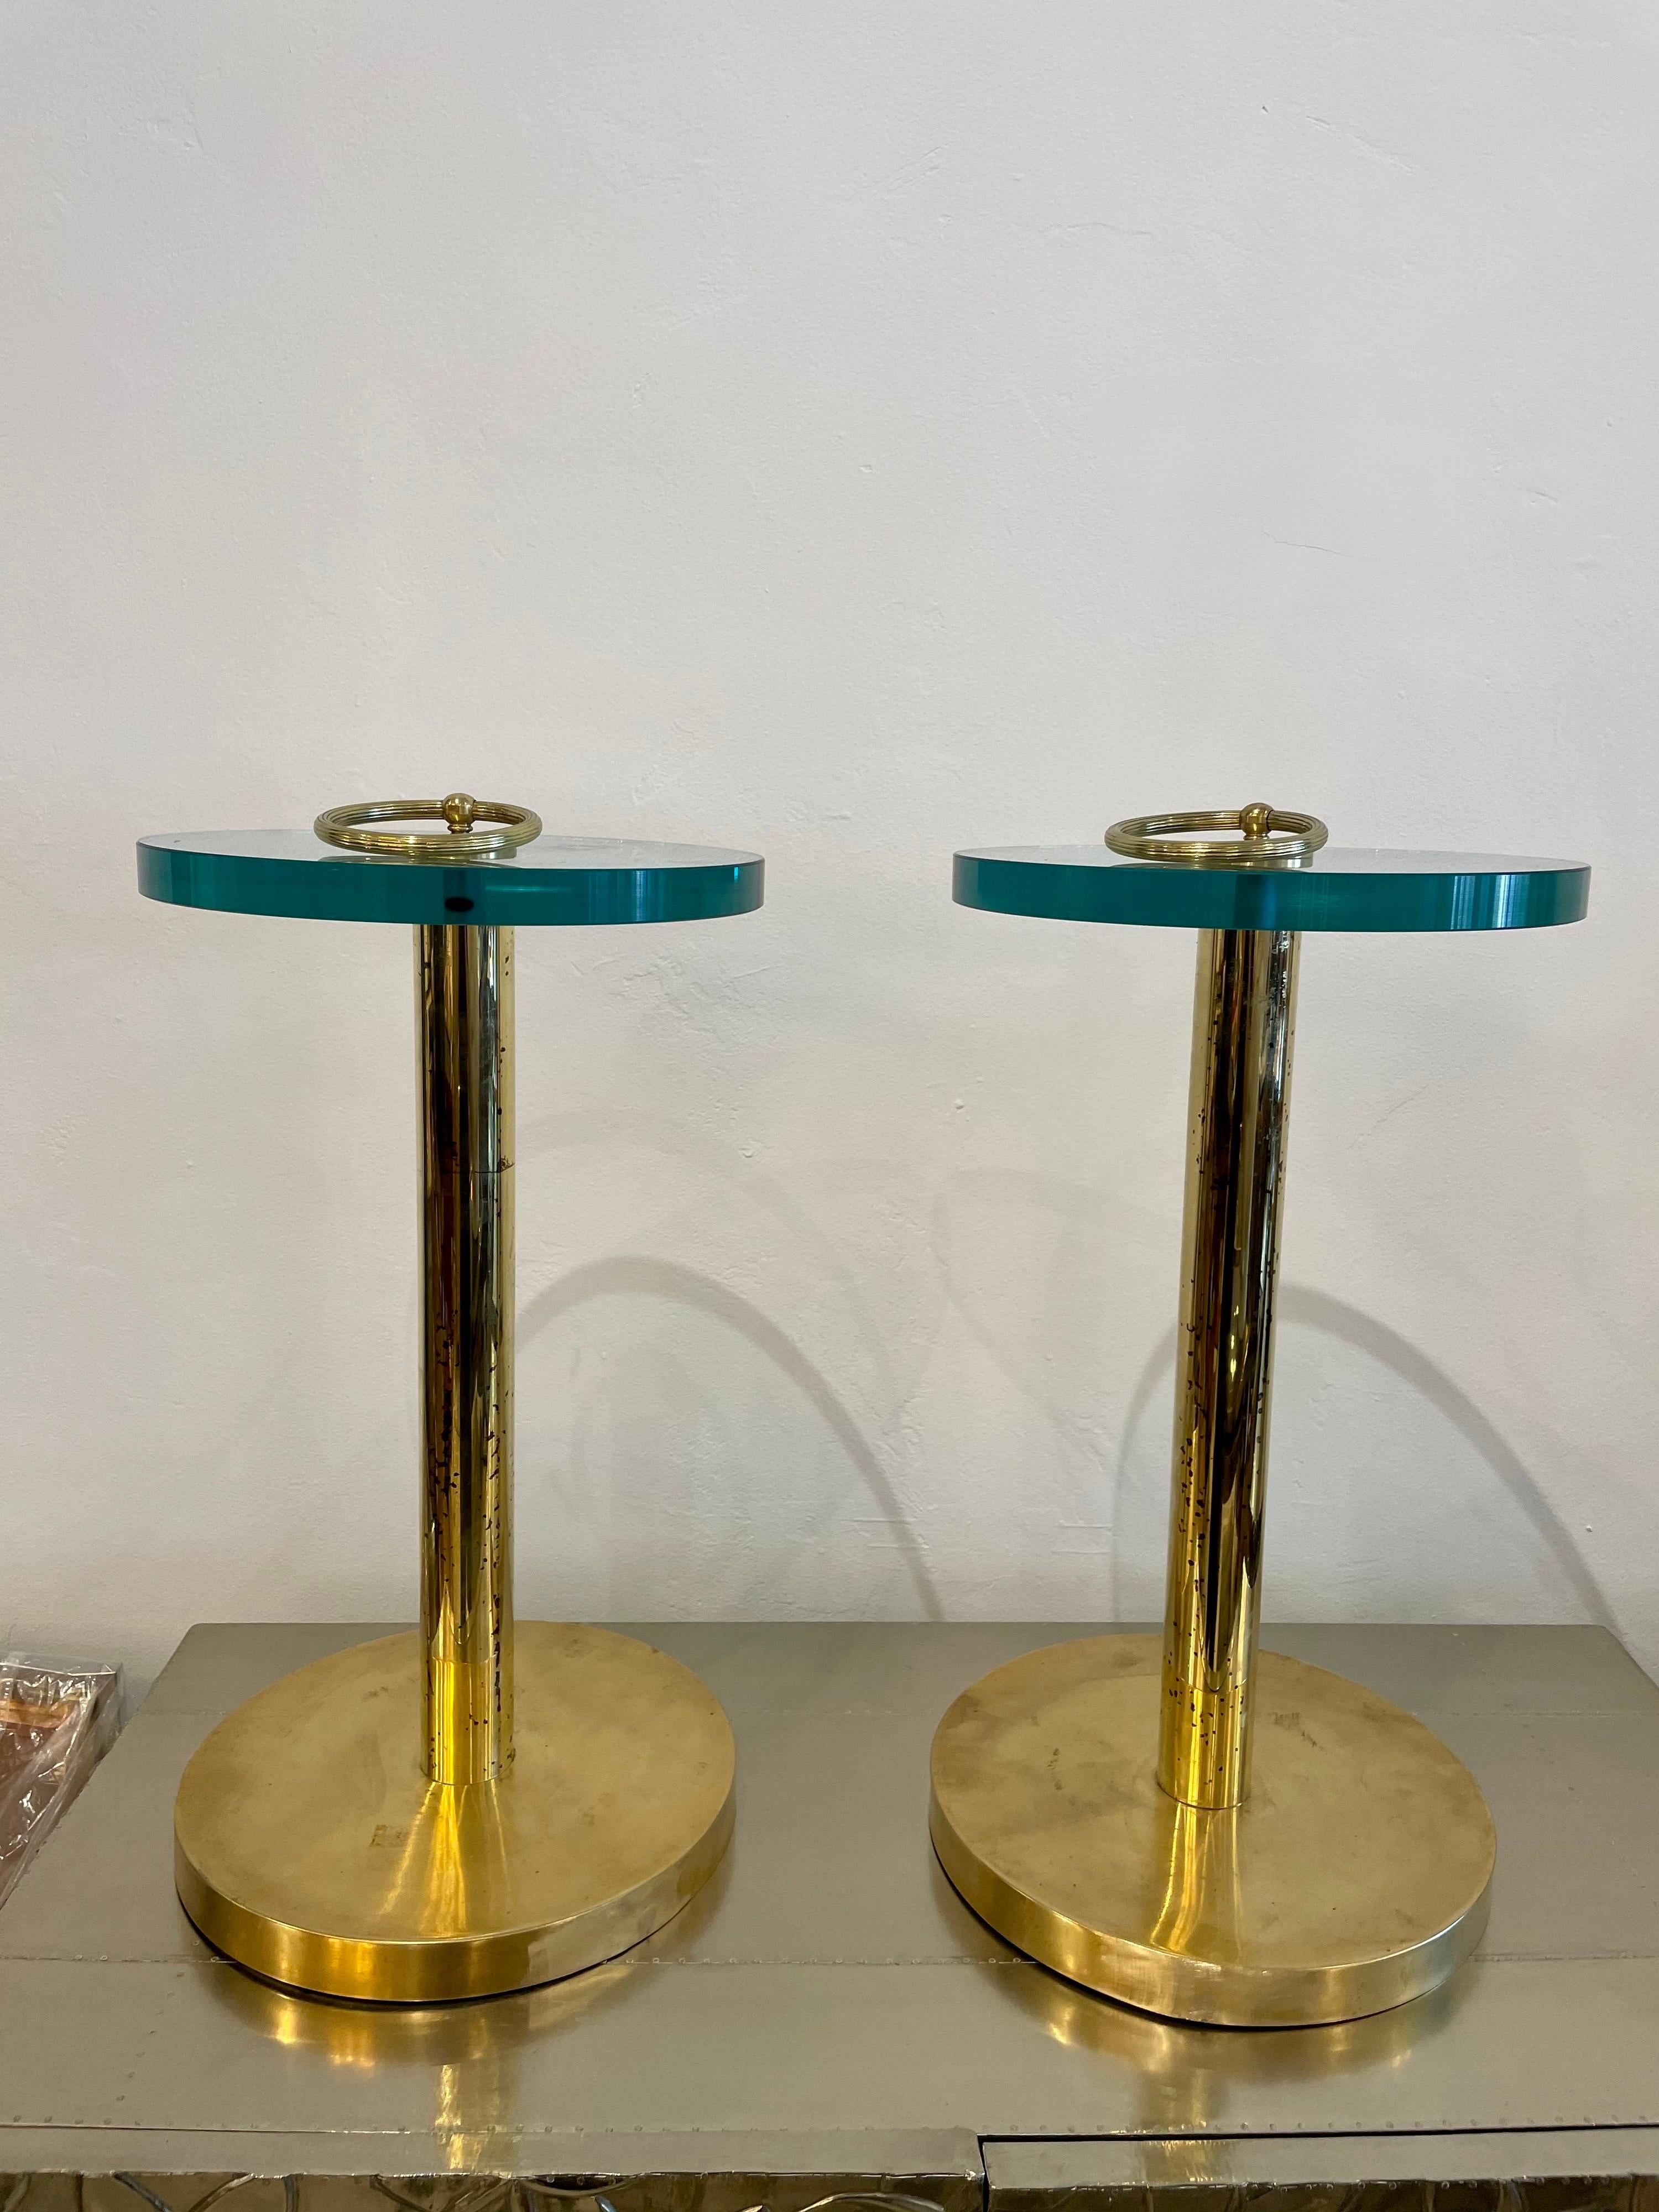 Showing wonderful age and patina, these brass rods and base with accent ring to top are perfect side tables for any decor. Very thick glass tops.